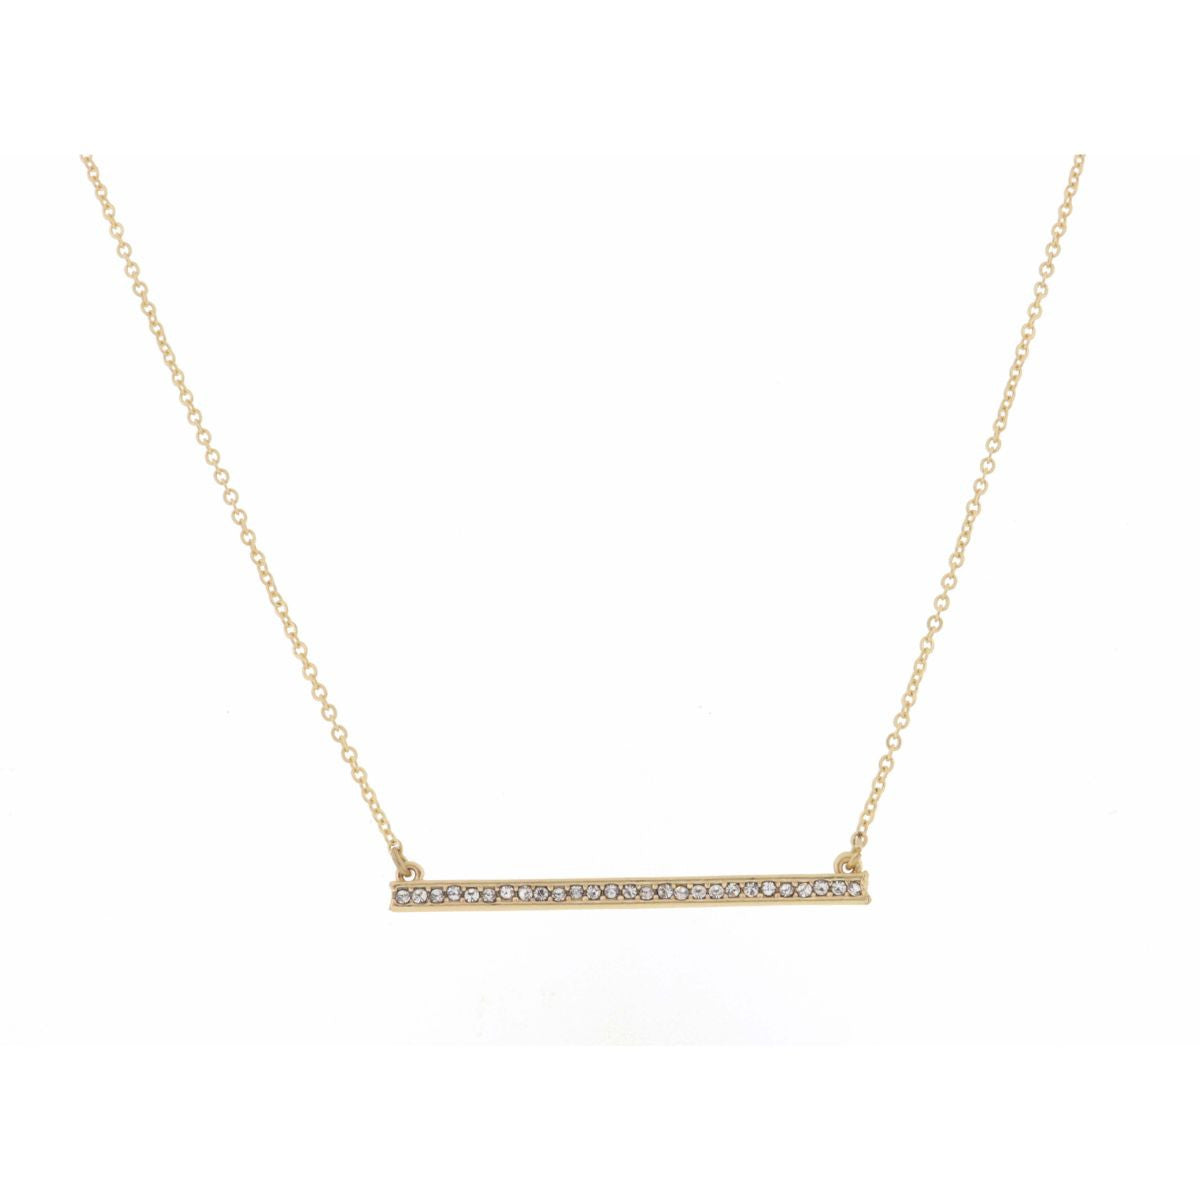 Jane Marie Long Straight Bar Clear Crystals Necklace